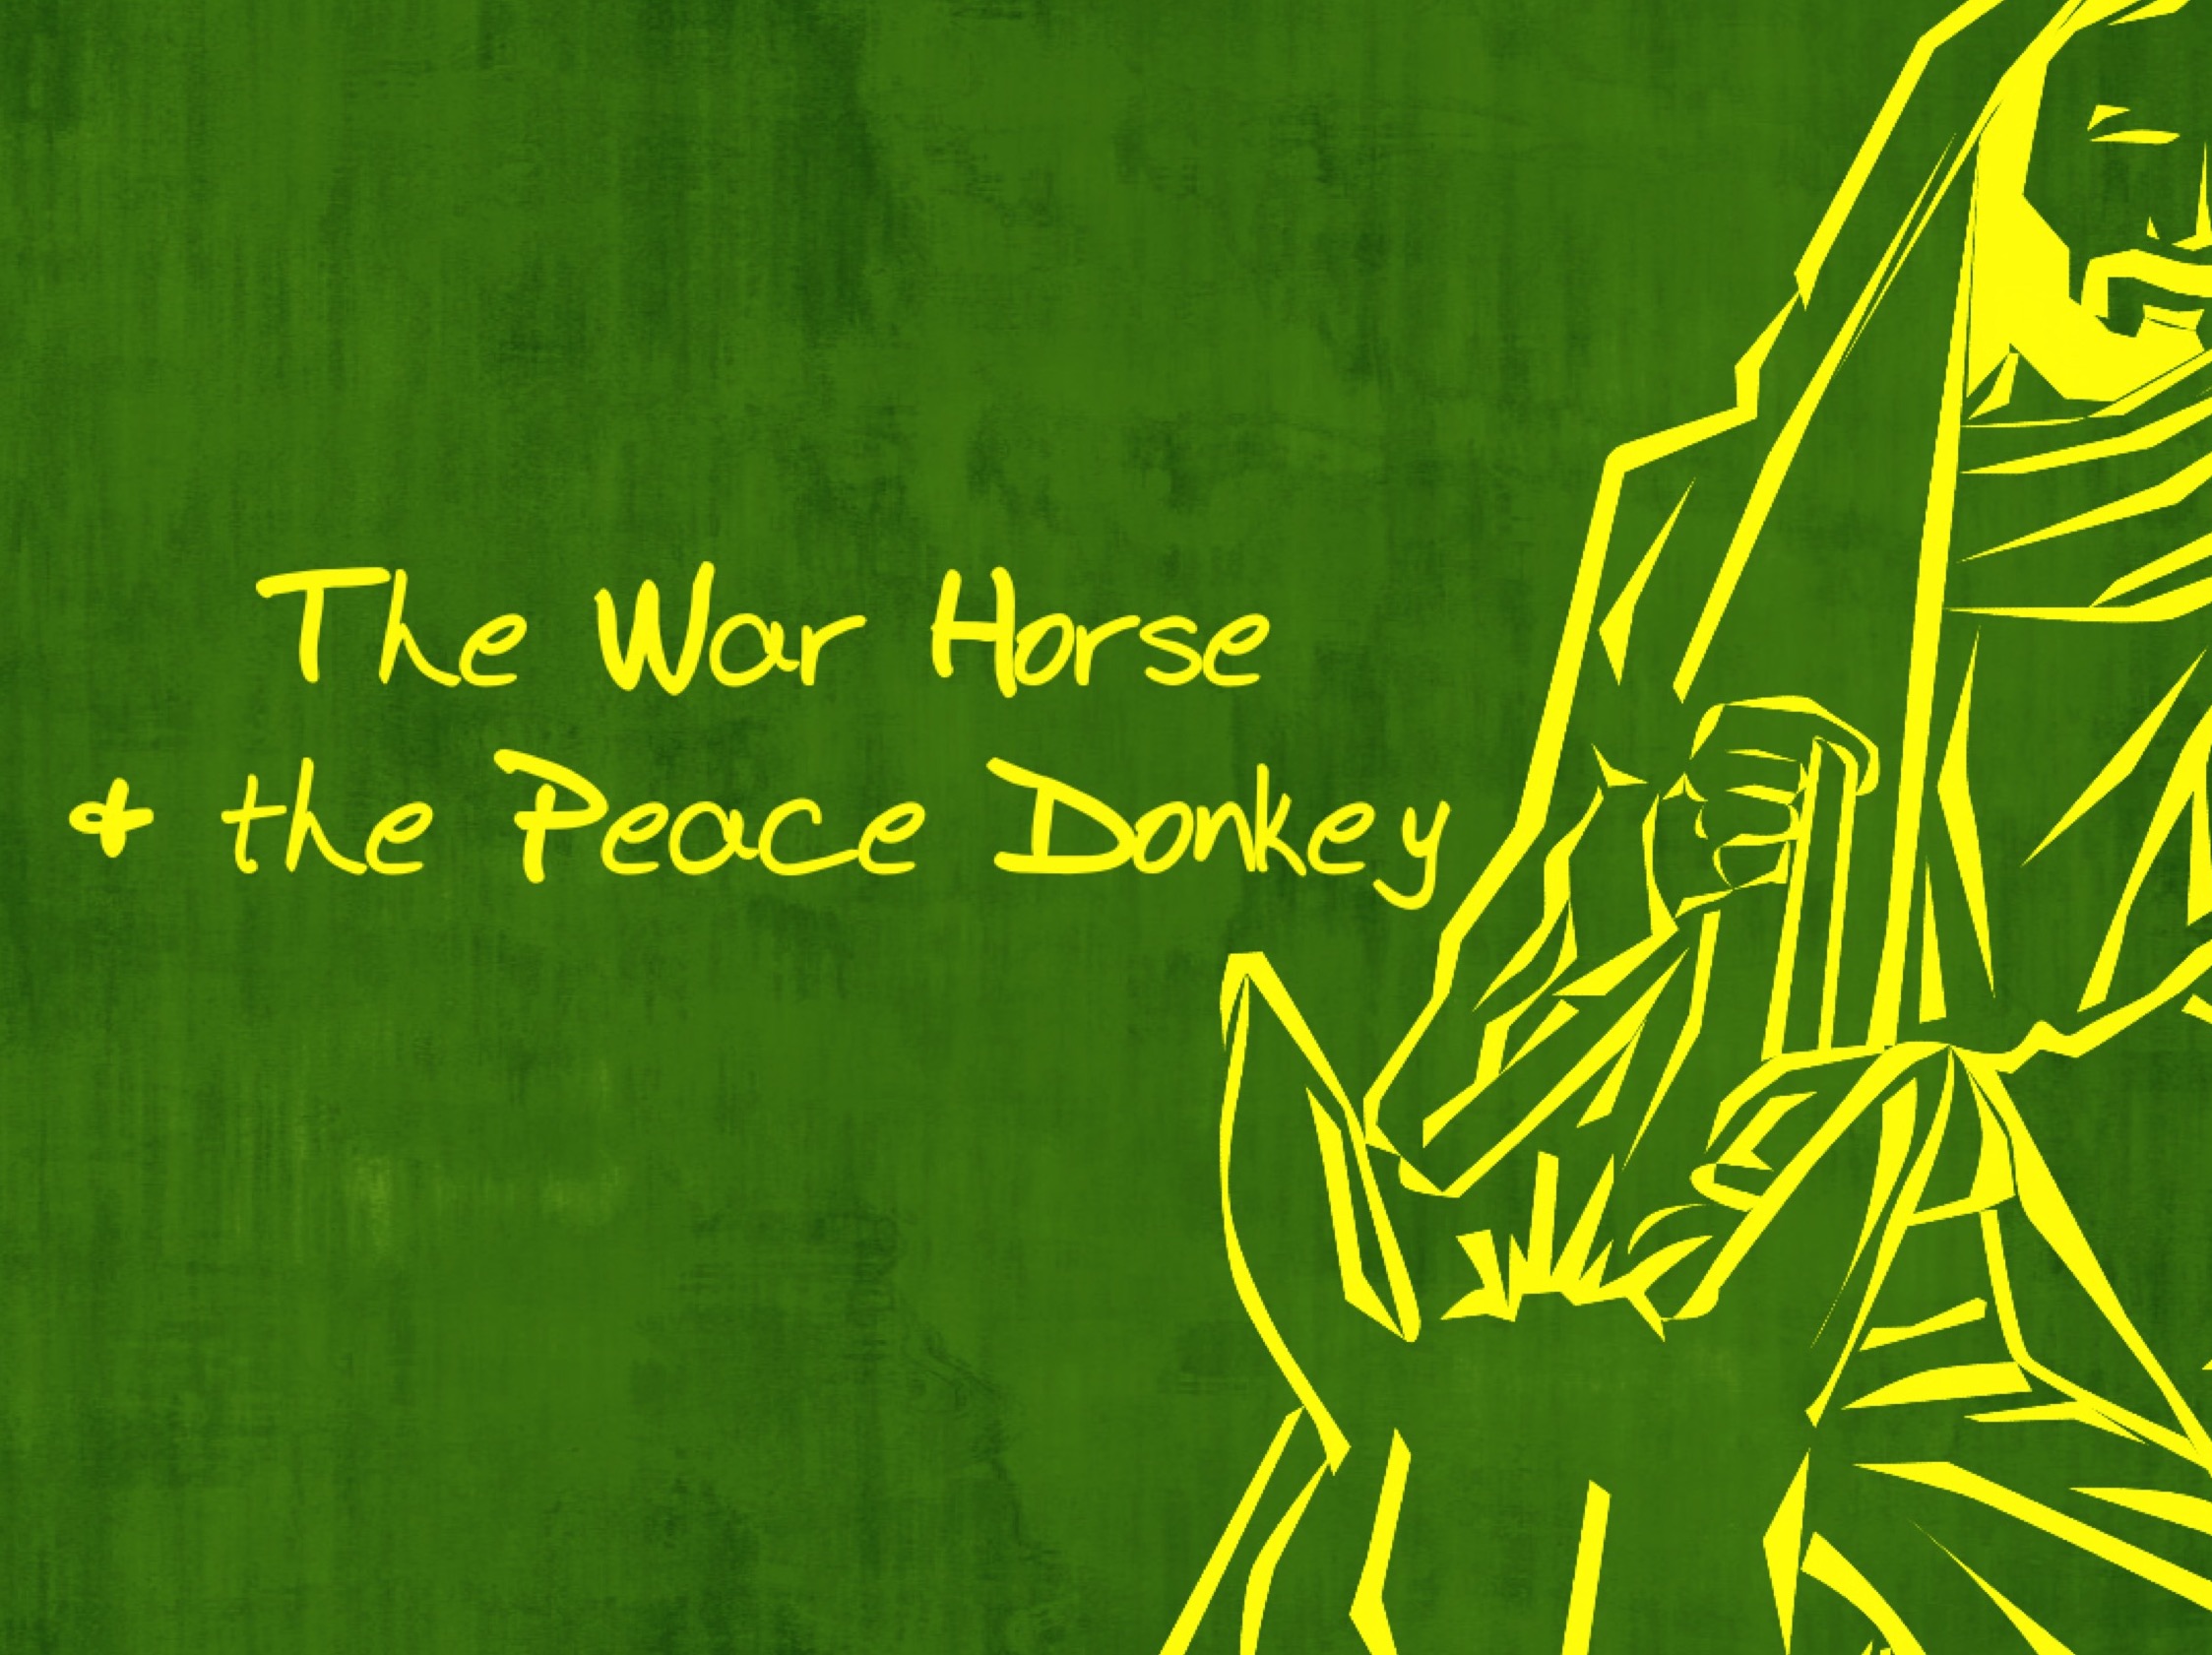 Ryan Post - "The War Horse and the Peace Donkey"